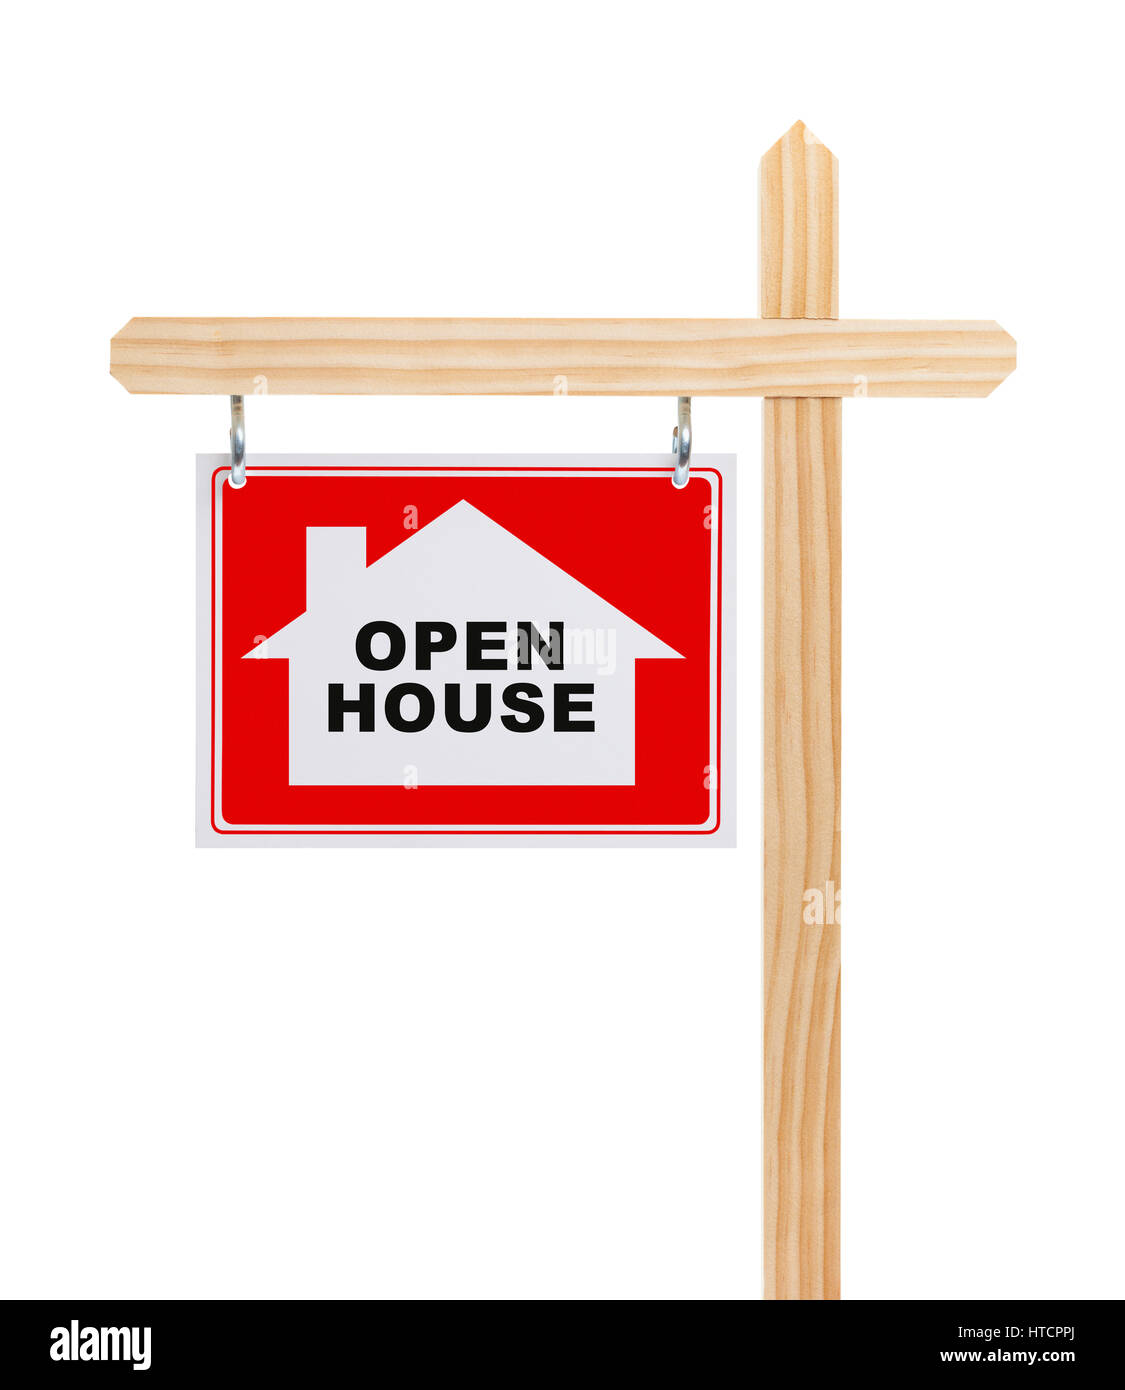 Open House Sign With House Symbol Isolated on White Background. Stock Photo